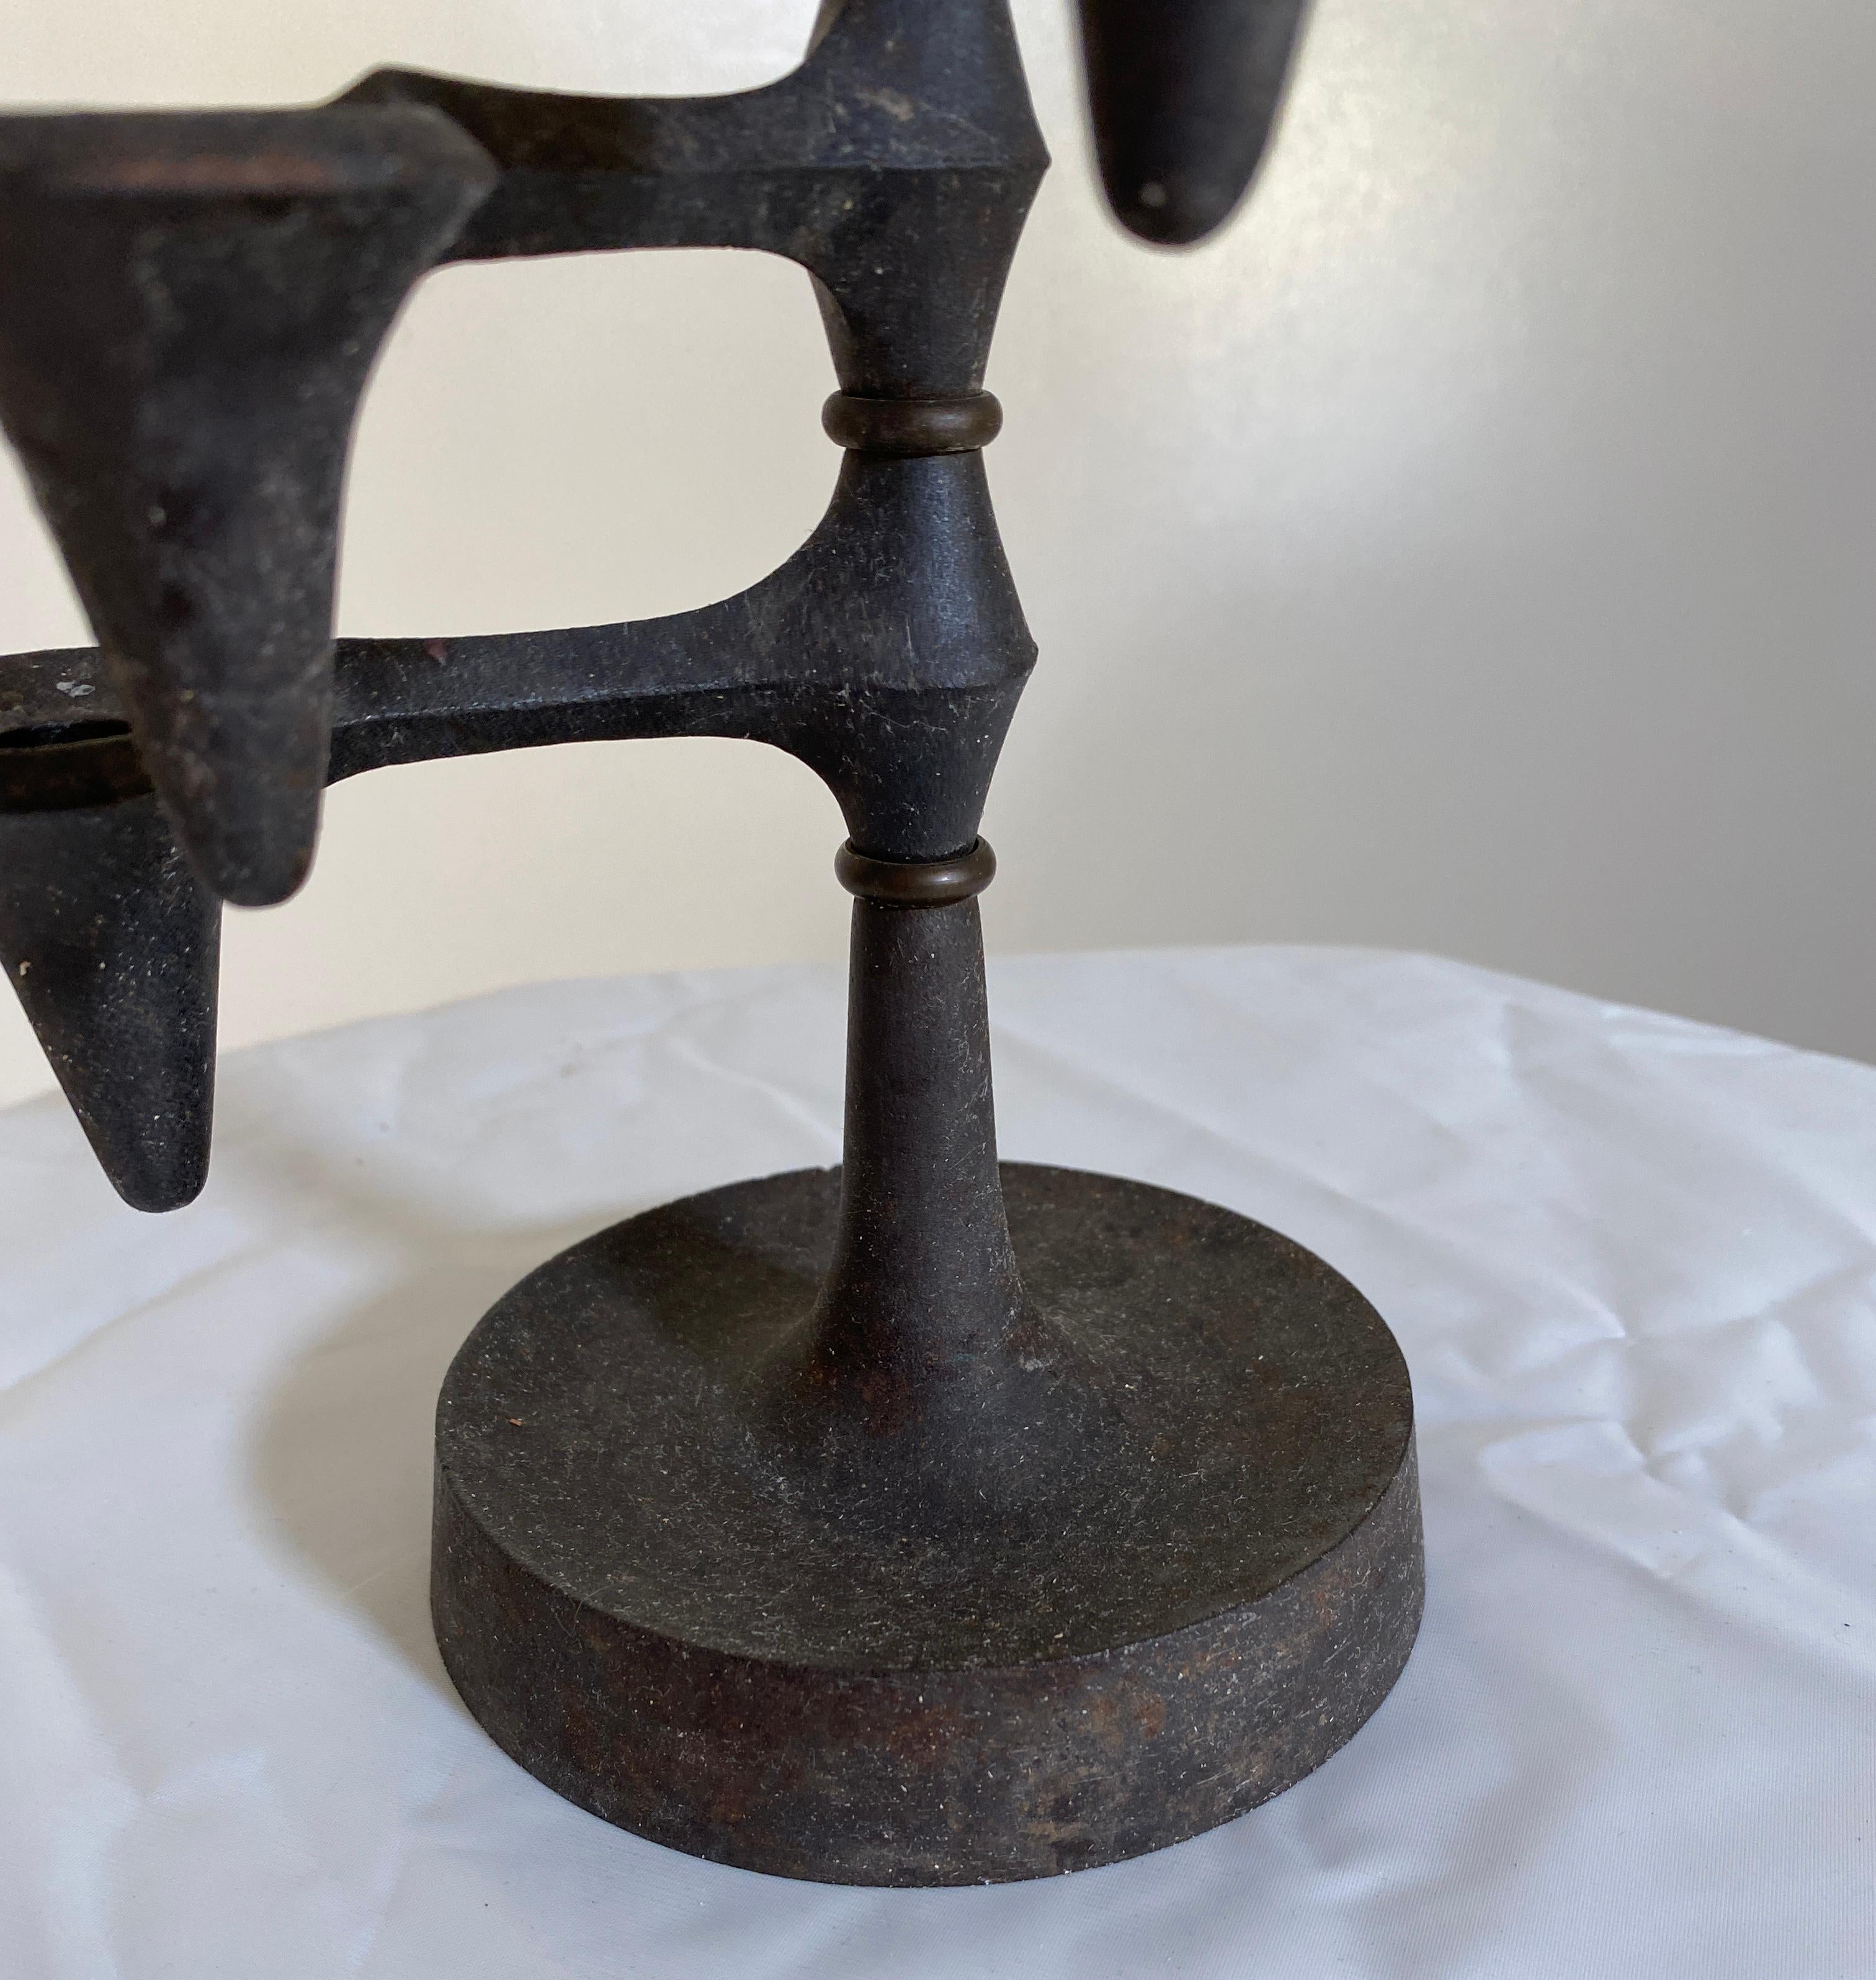 Jens Harald Quistgaard Dansk Denmark Iron Tabletop Candleholder, 1960 In Good Condition For Sale In South Charleston, WV